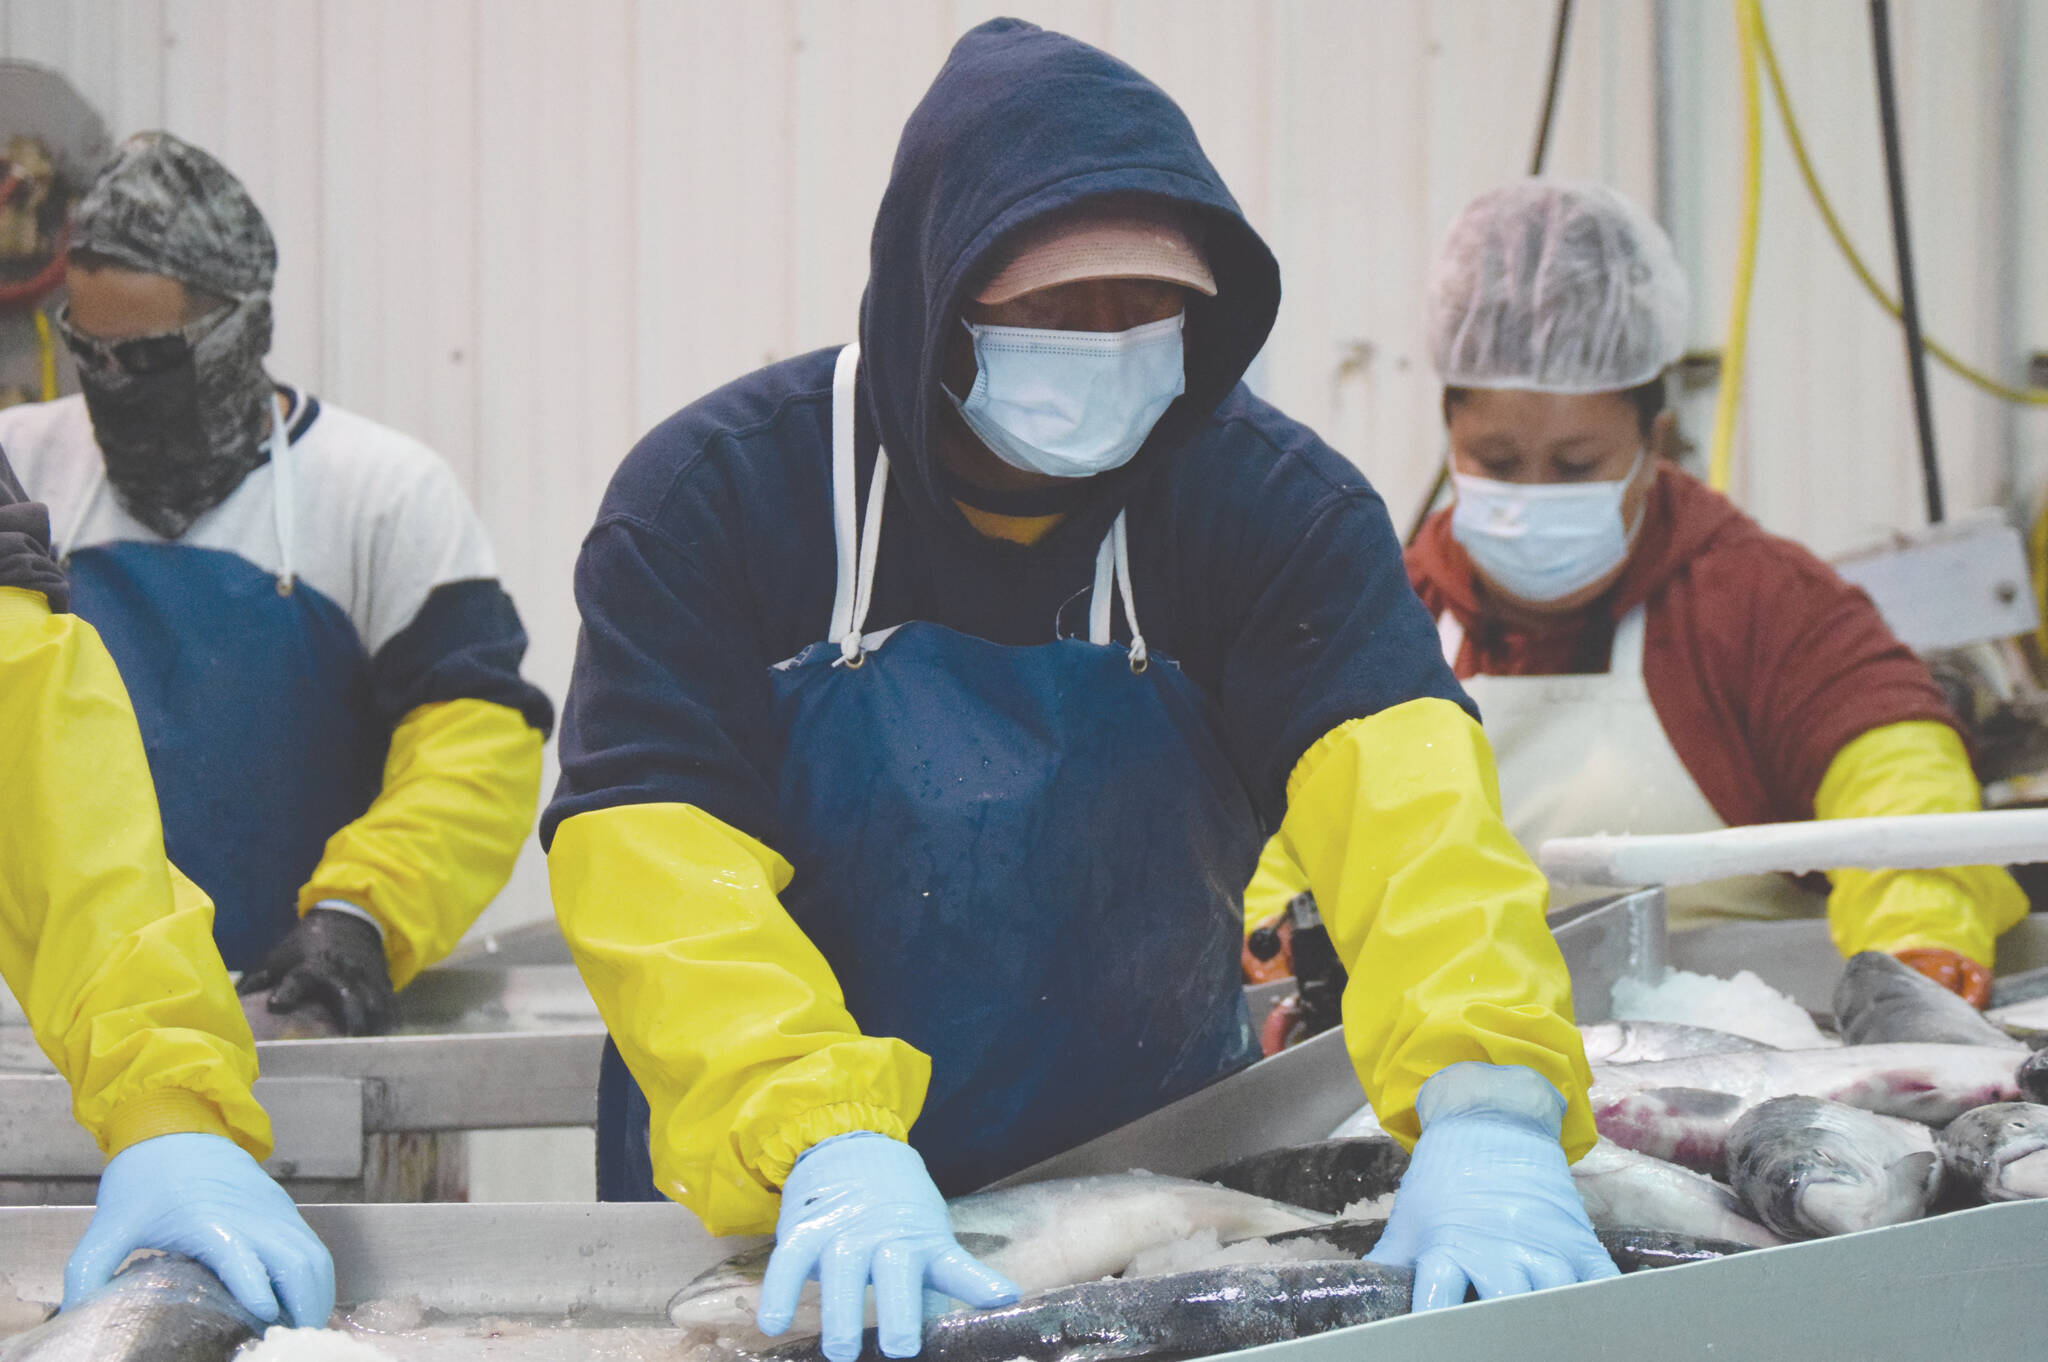 Joseph Lee, of Idaho, backed by Ivan Zarate, of Arizona, and Abiud Zarate, of Baja California, Mexico, arrange fish so their heads can be chopped off by a guillotine-style machine Tuesday, July 14, 2020, at Pacific Star Seafoods in Kenai, Alaska. Not only were seafood jobs lost due to COVID restrictions, infections among industry personnel affected the fishing season. (Photo by Jeff Helminiak/Peninsula Clarion)